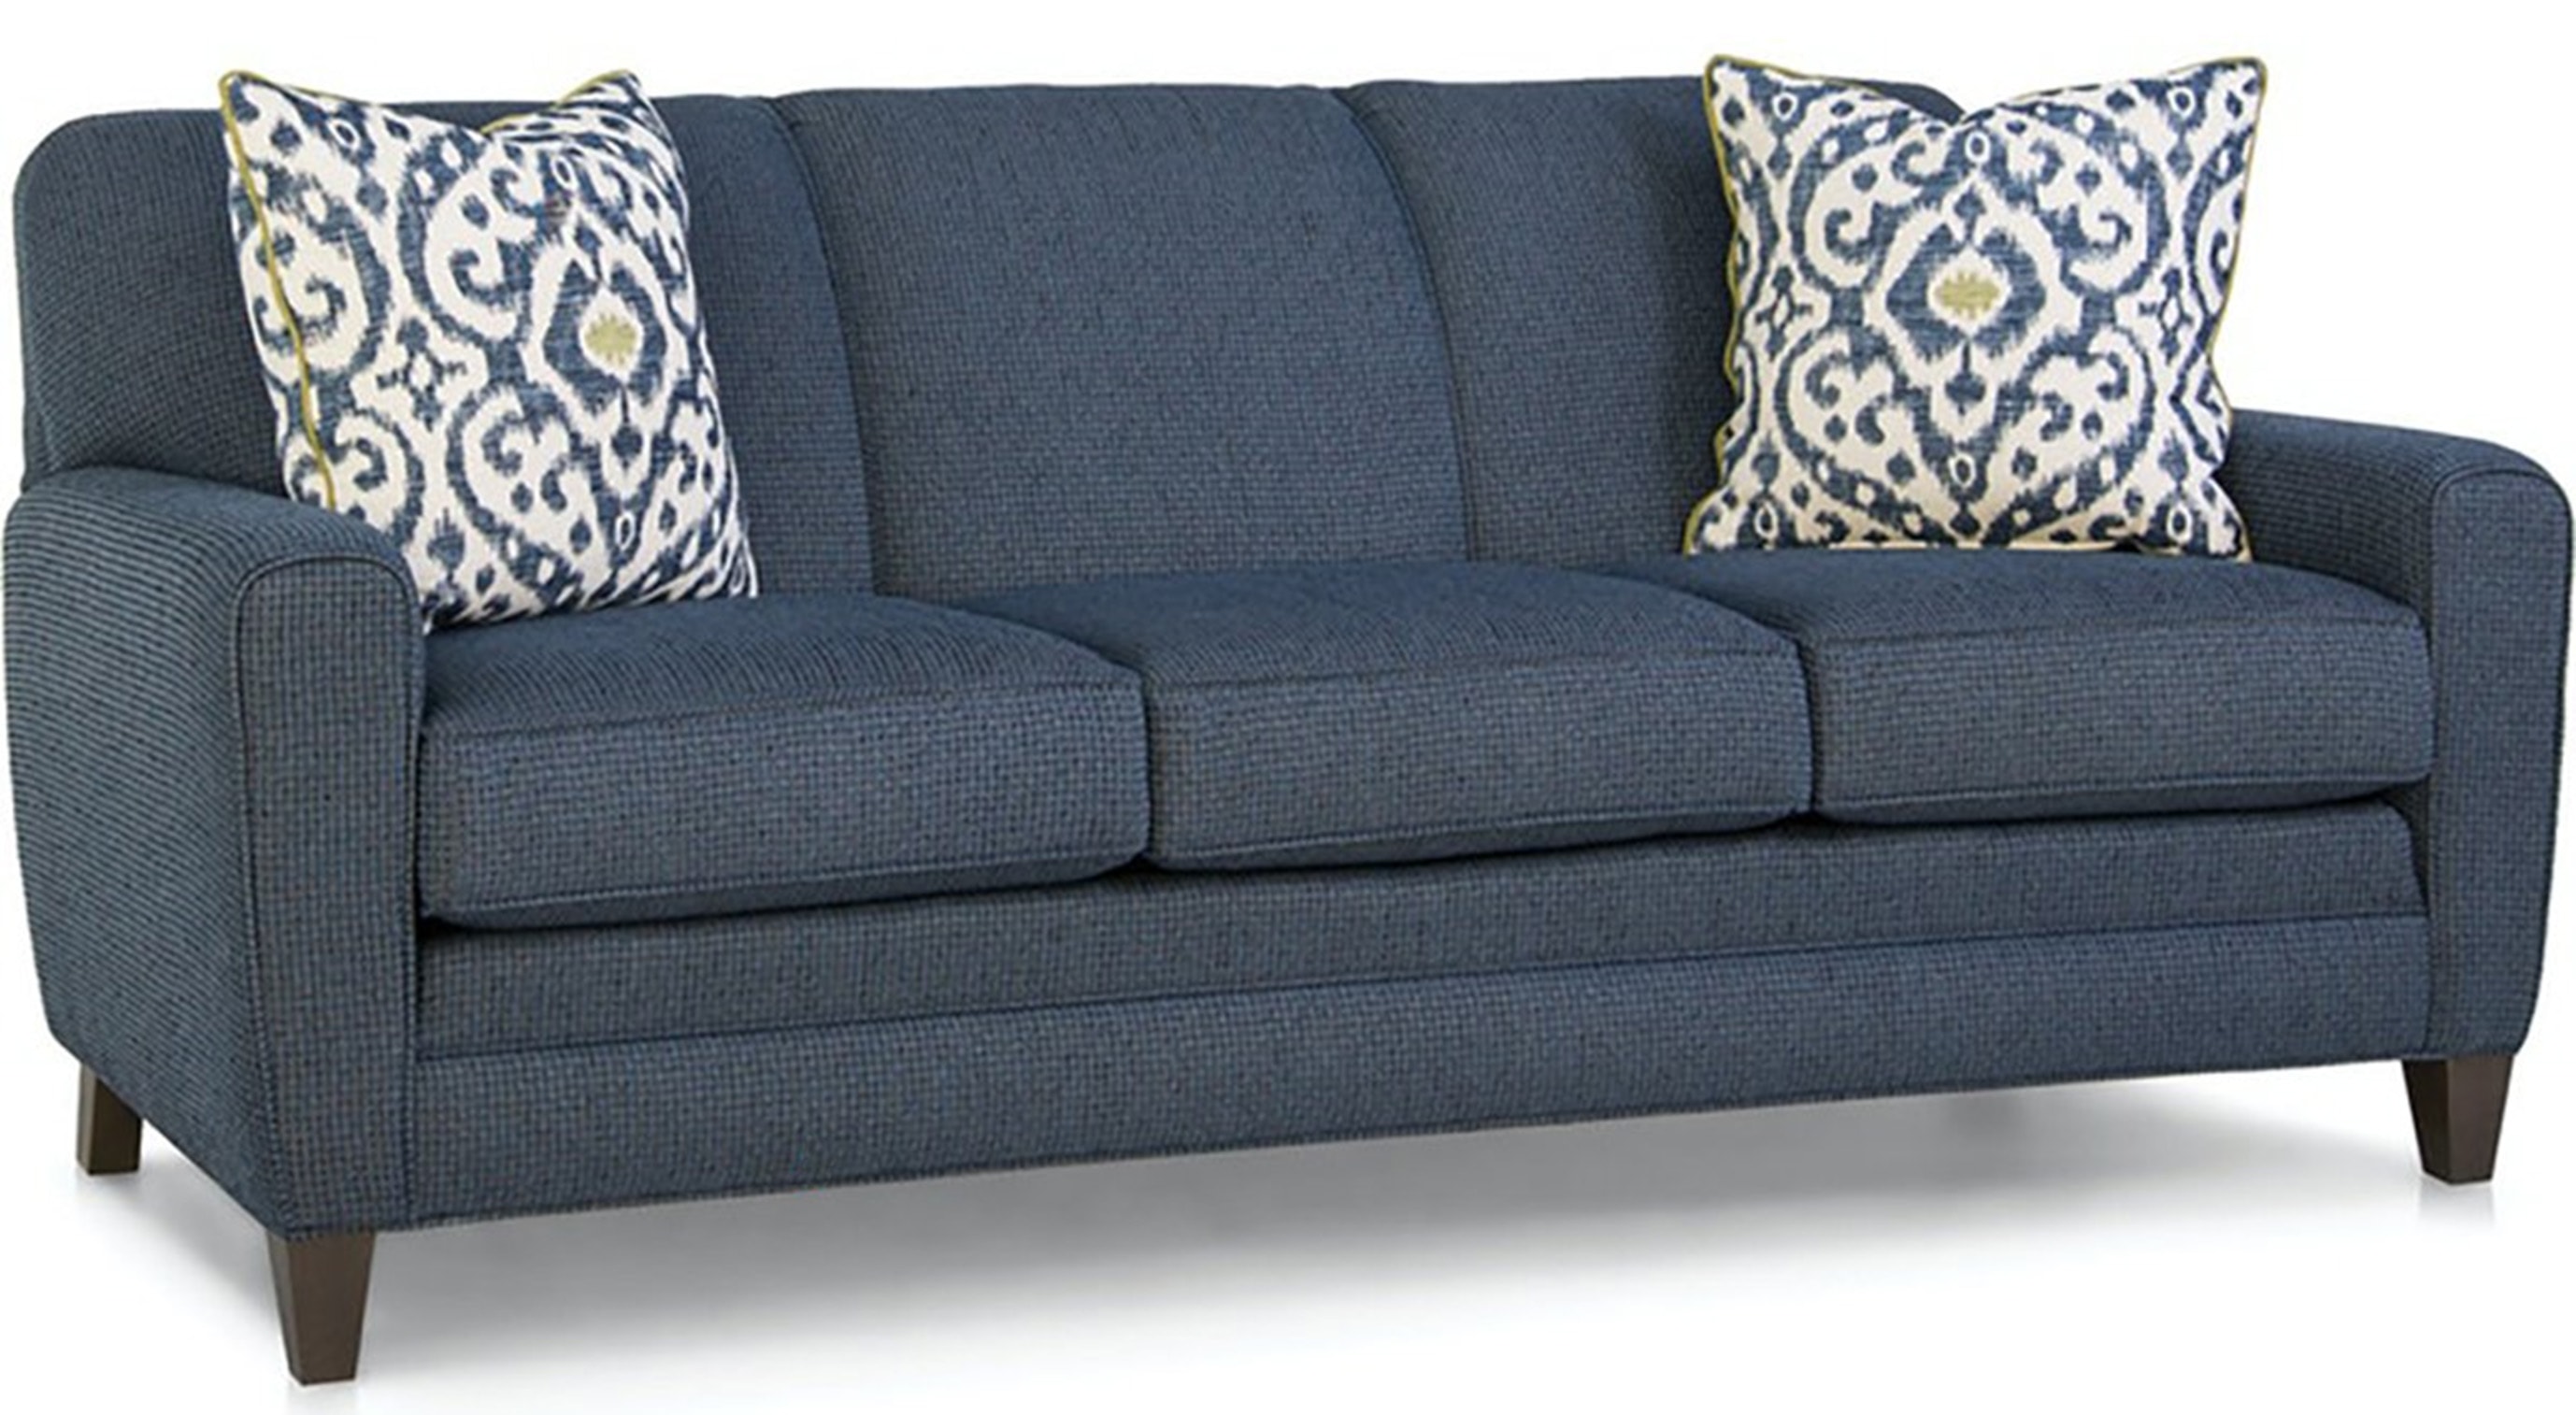 What is the best fabric for your sofa